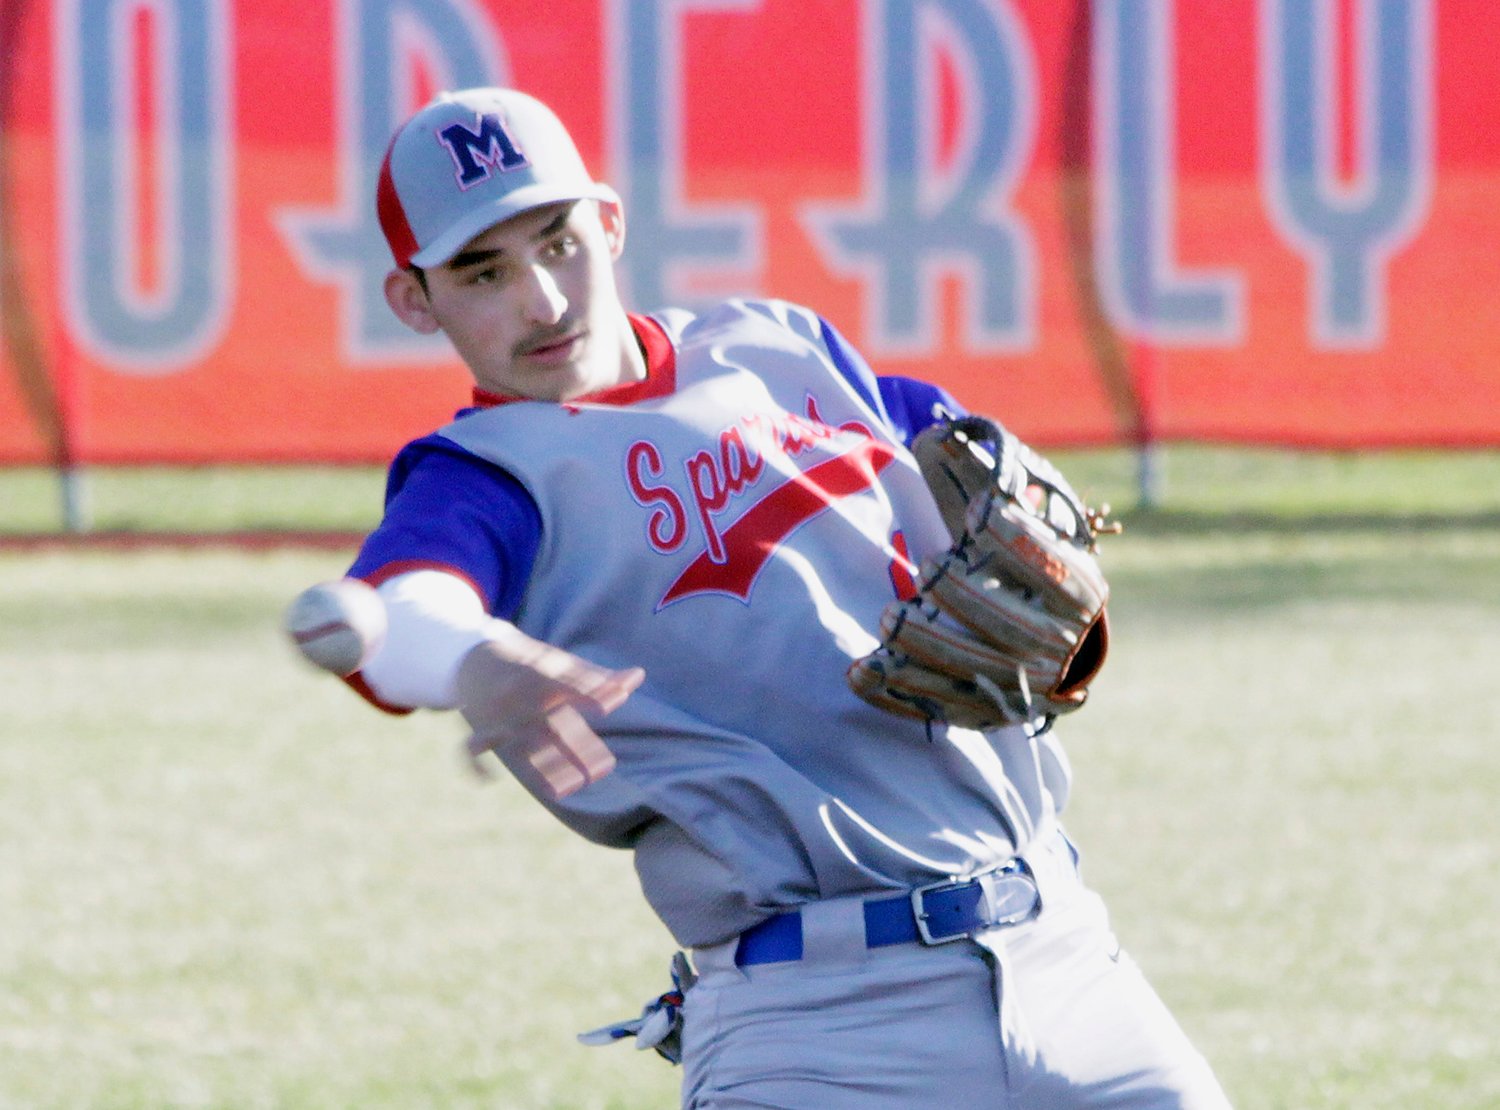 Moberly second baseman Chris Coonce leans backwarrd as he makes a throw to first base Monday during the Spartans 10-3 home baseball loss to Kirksville.